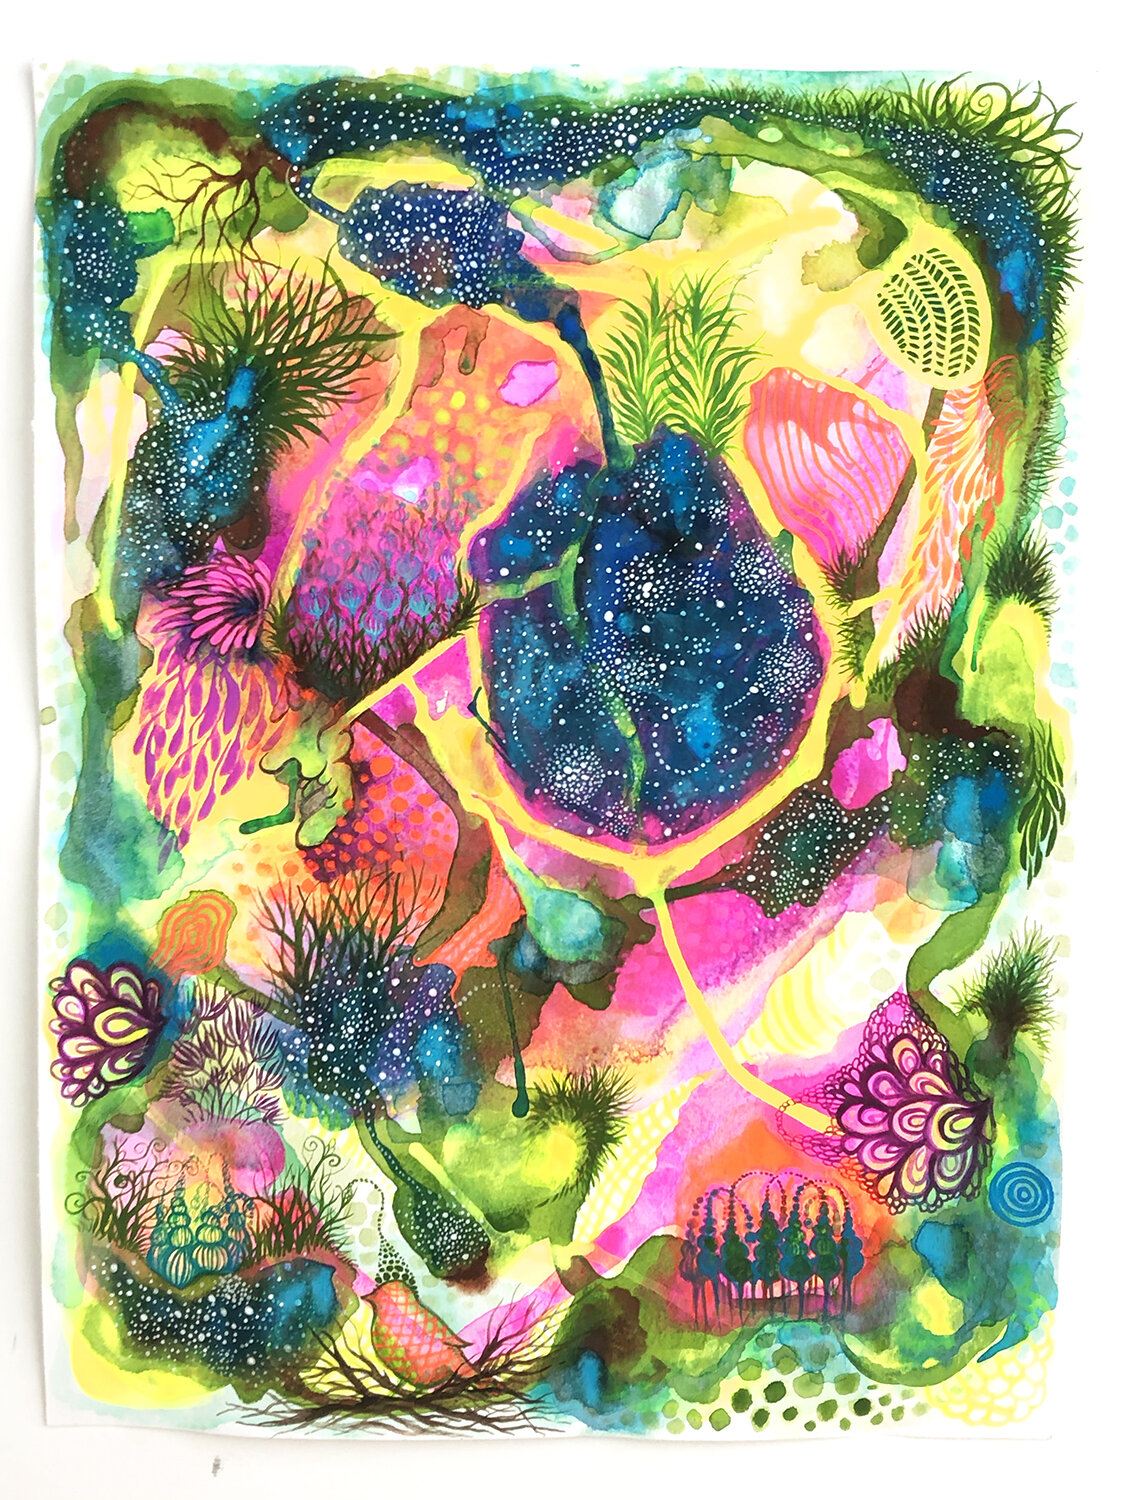 Carrie Lederer, Abstract Garden and the United Universe, 2021, Acryla gouache on paper, 12 x 10"